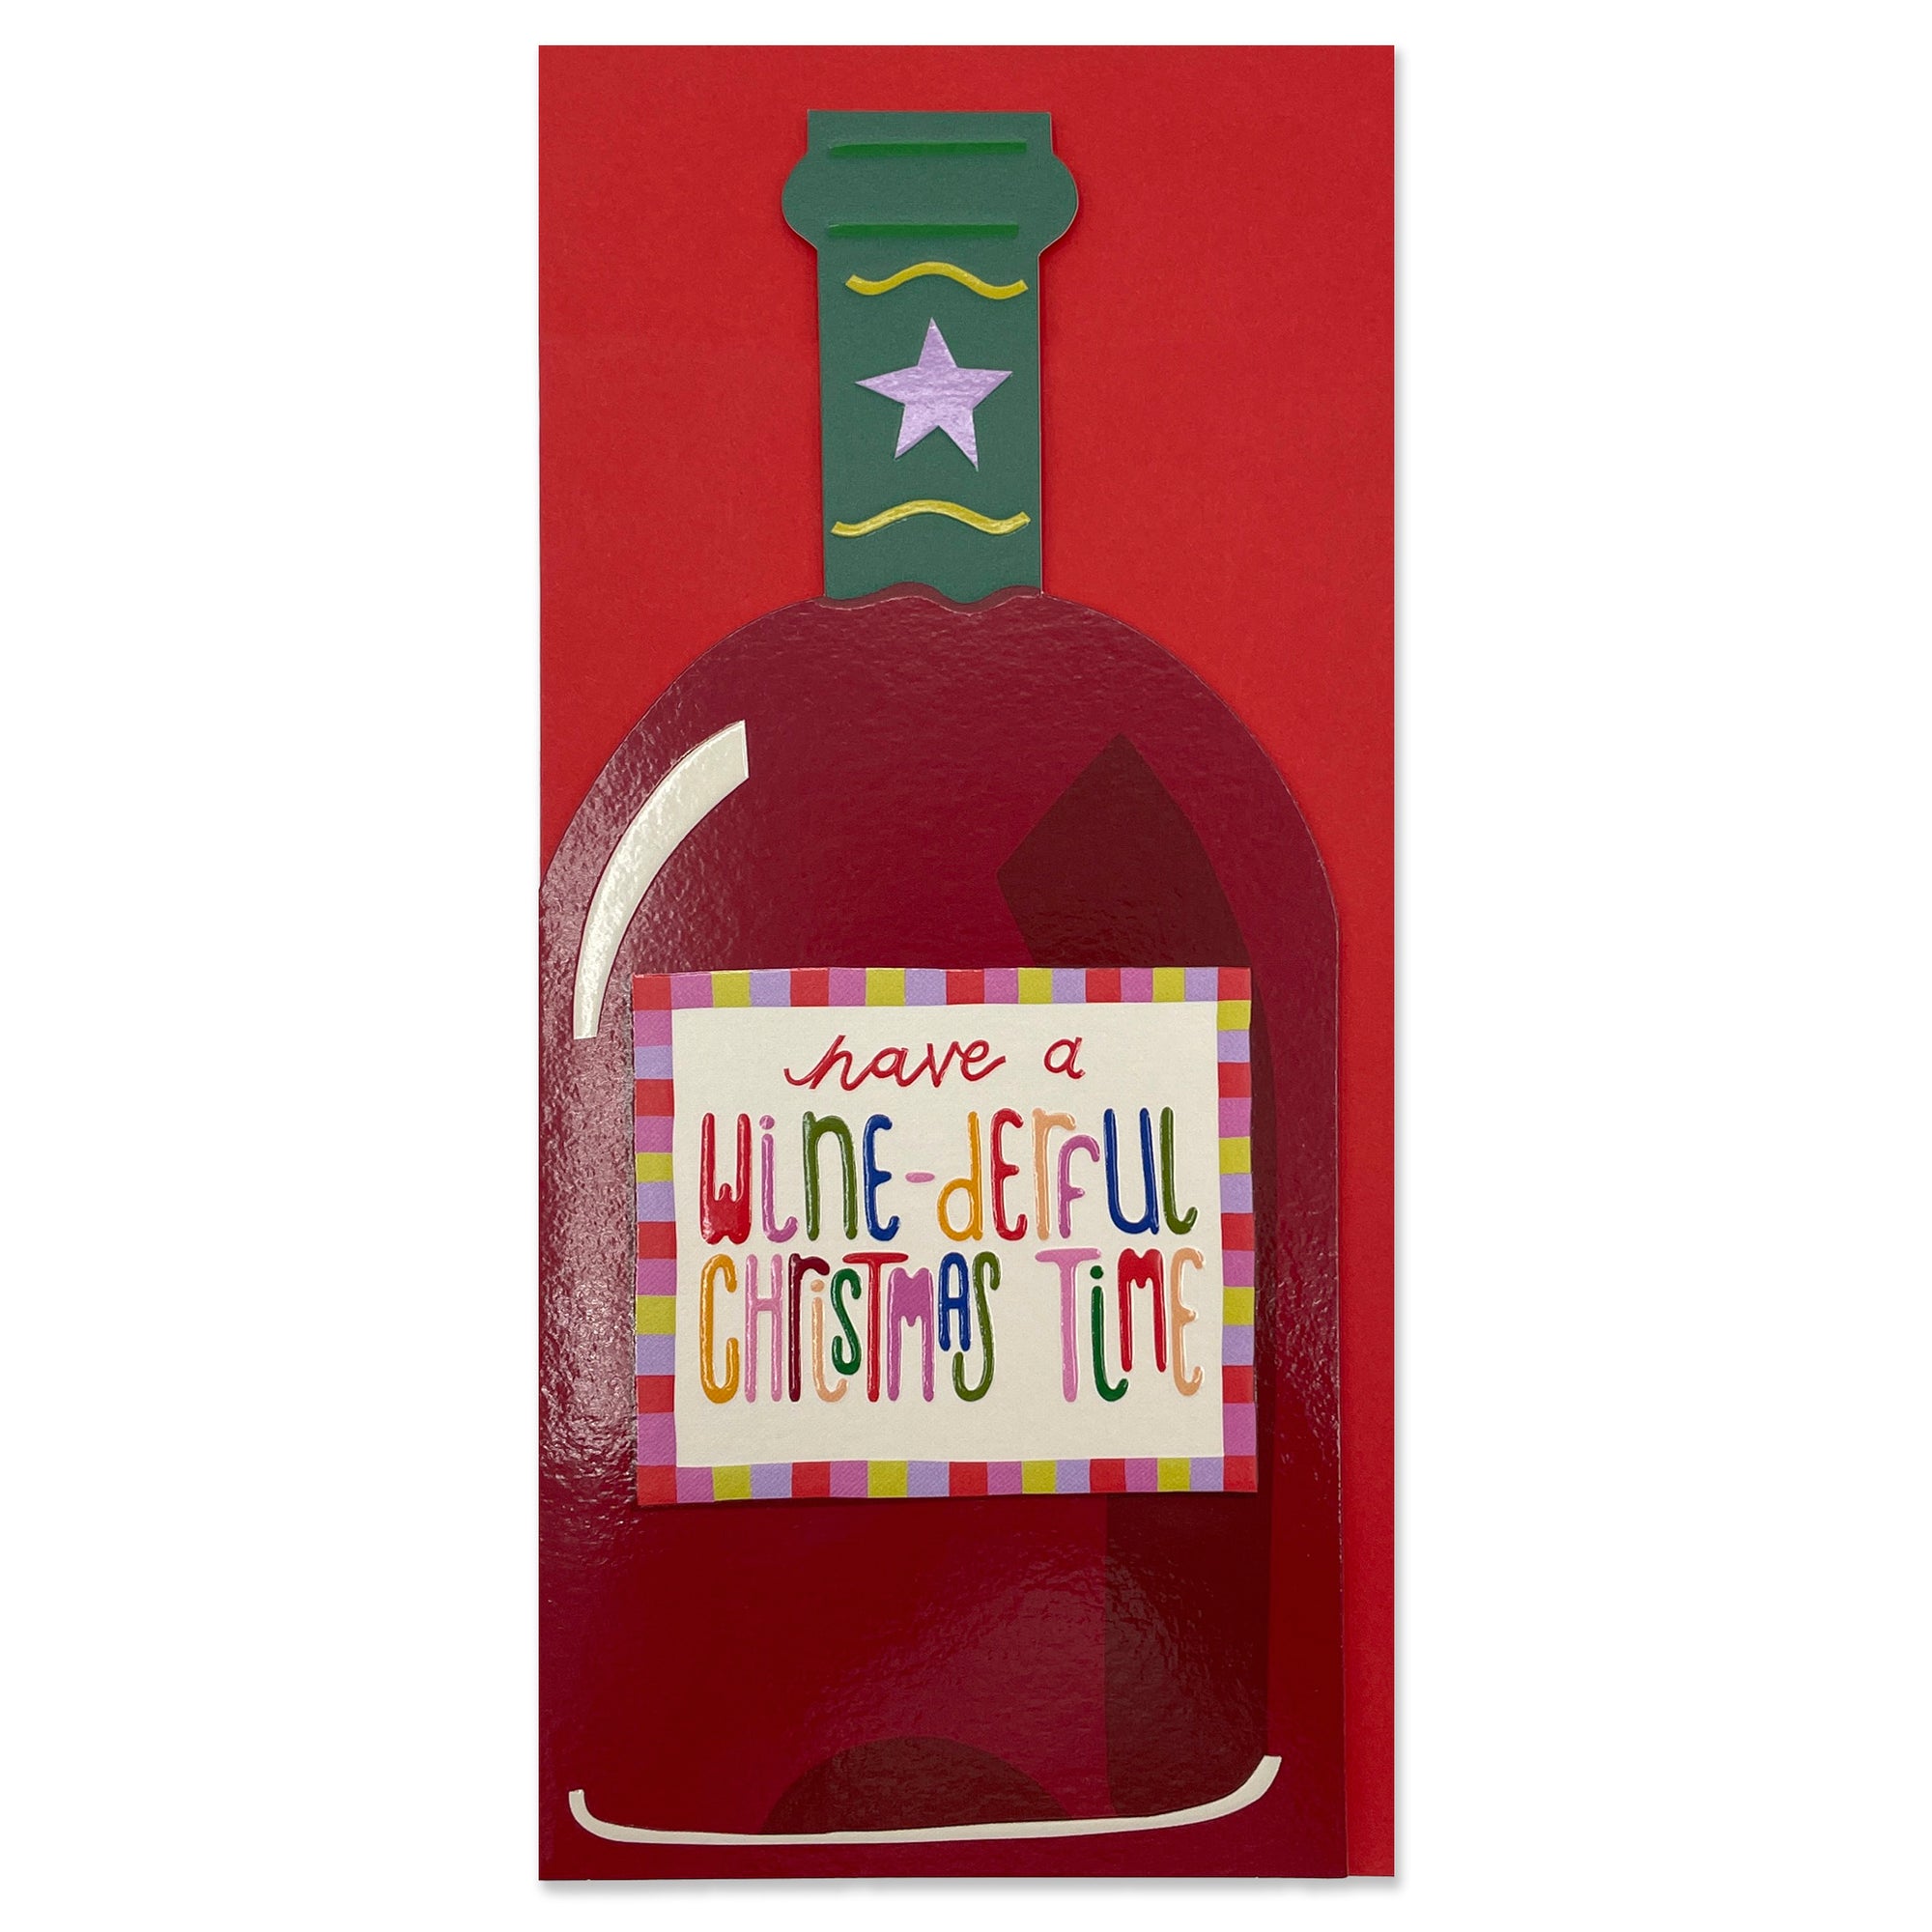 A christmas card in the shape of a red wine bottle featuring a label with the words ' have a wine-derful christmas time'.